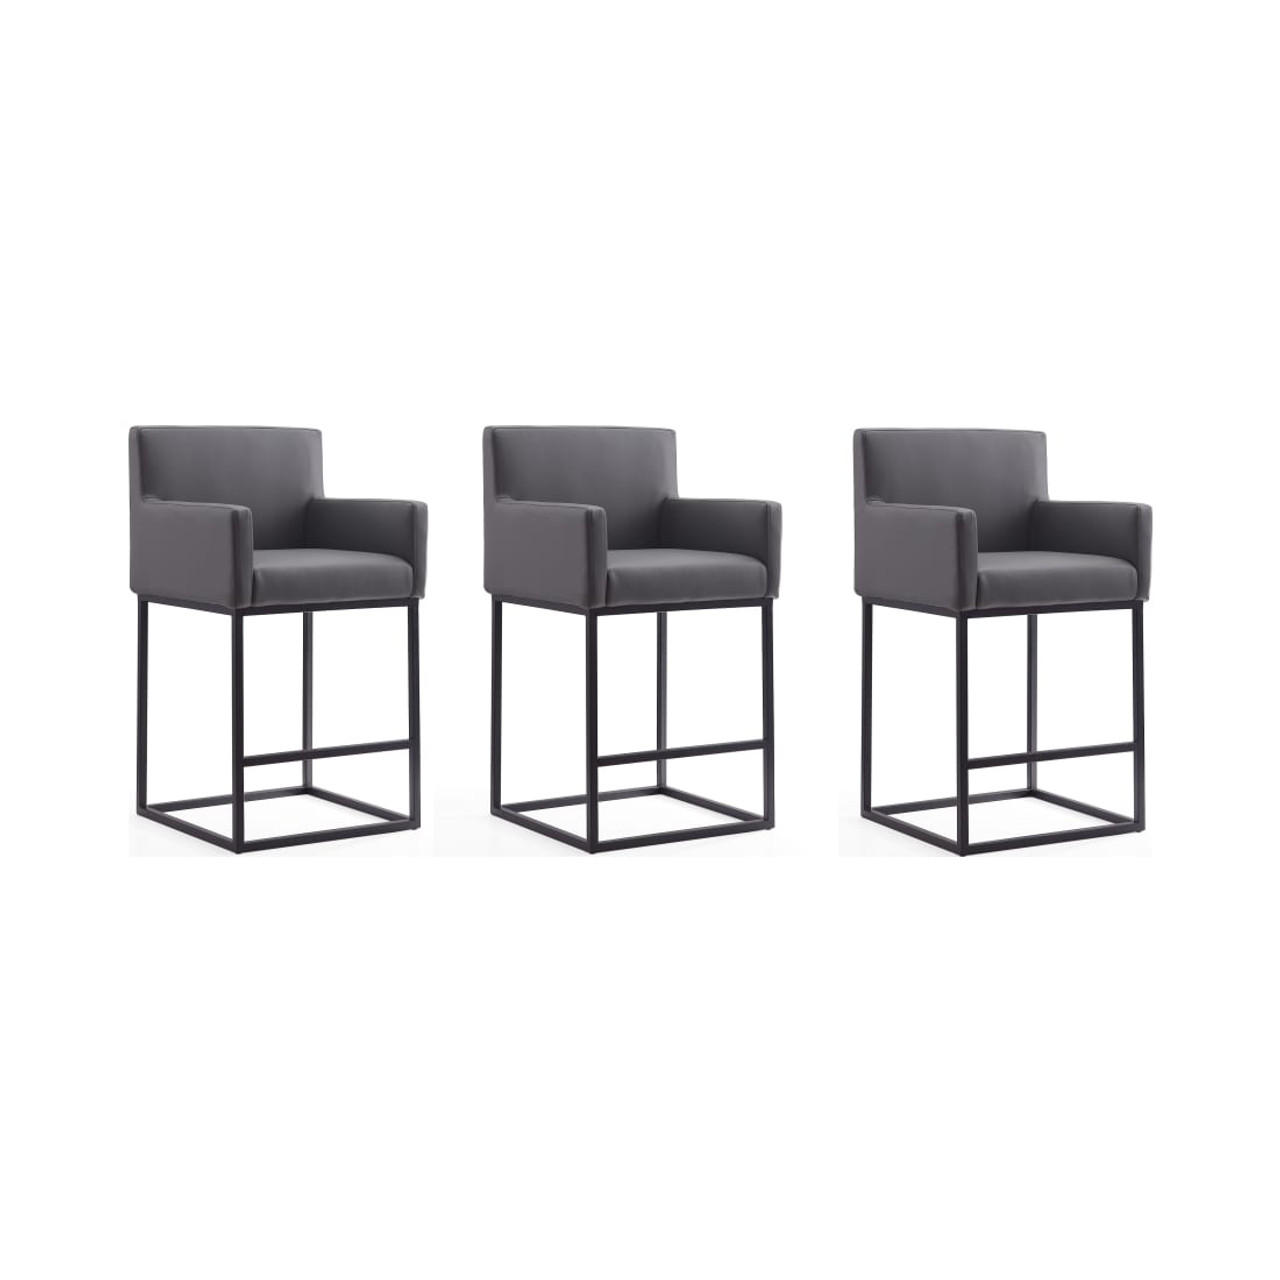 Ambassador Counter Stool in Gray and Black (Set of 3)